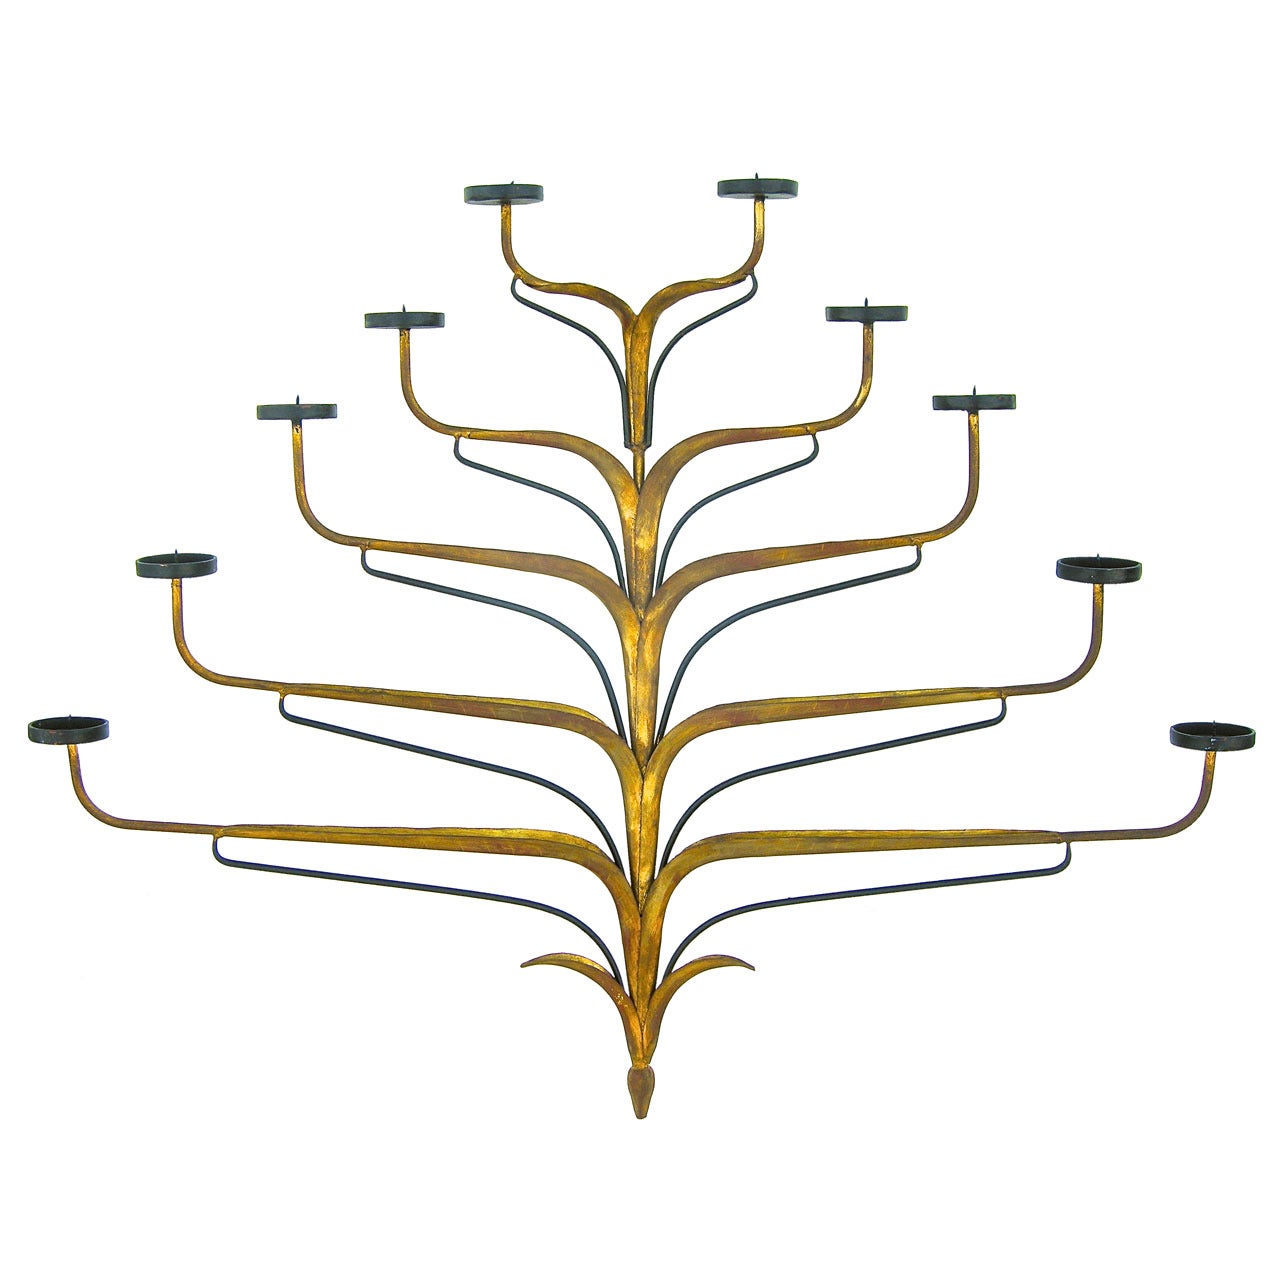 Italianate Modernist Sconce For Sale